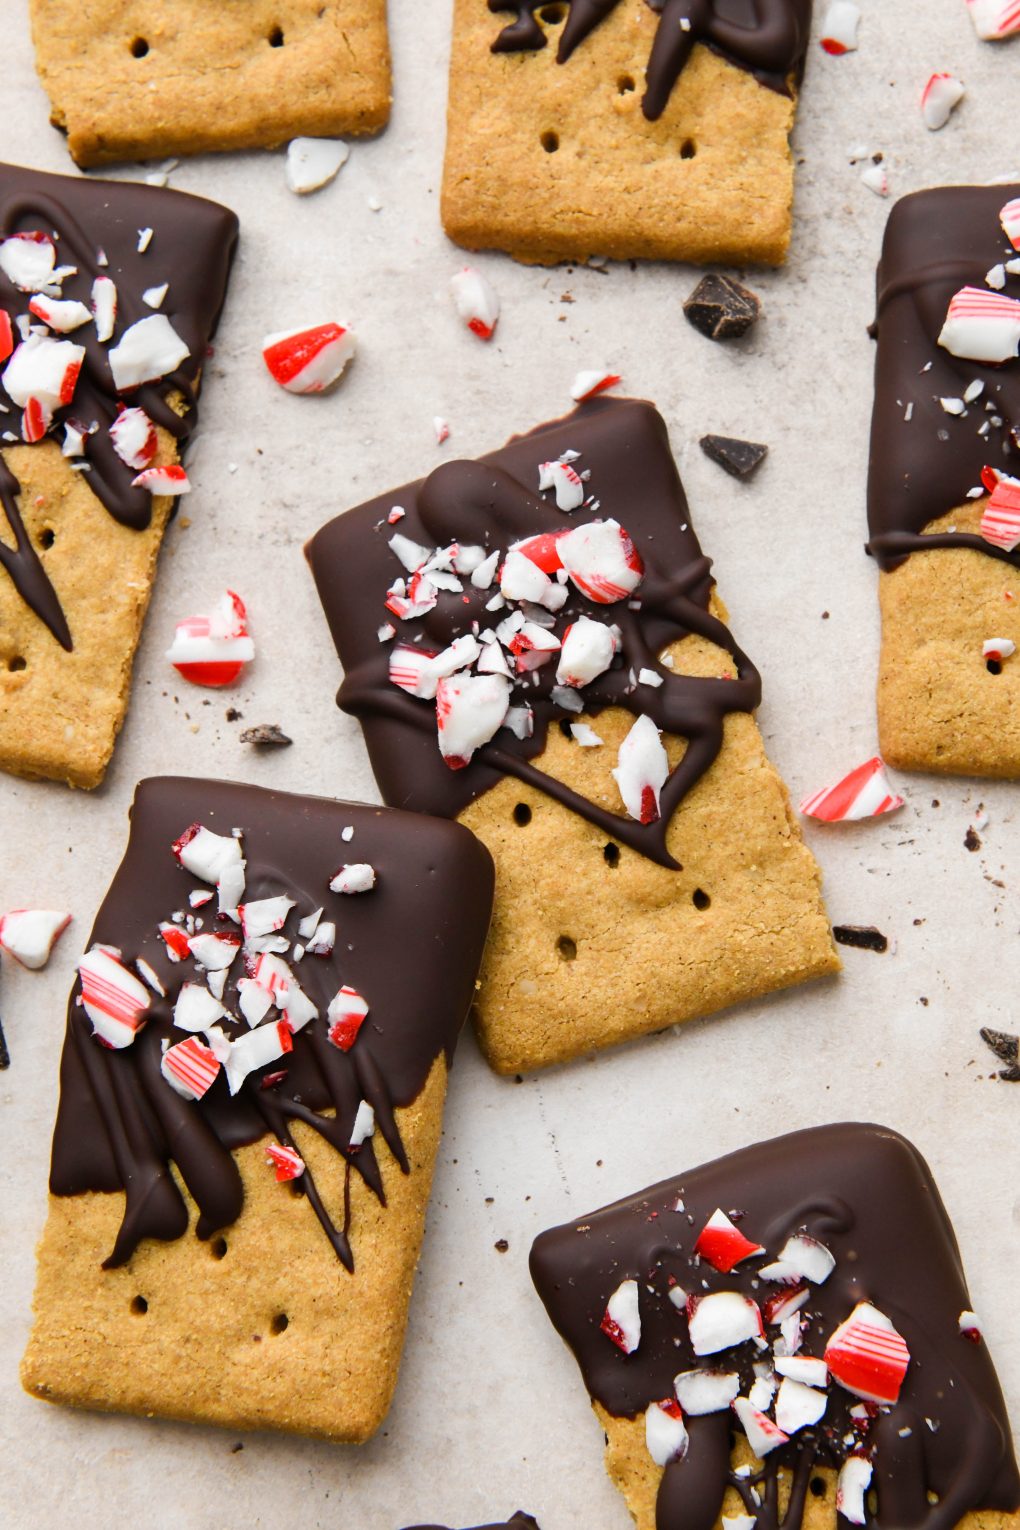 Chocolate dipped graham crackers topped with crushed candy canes on a light brown surface.